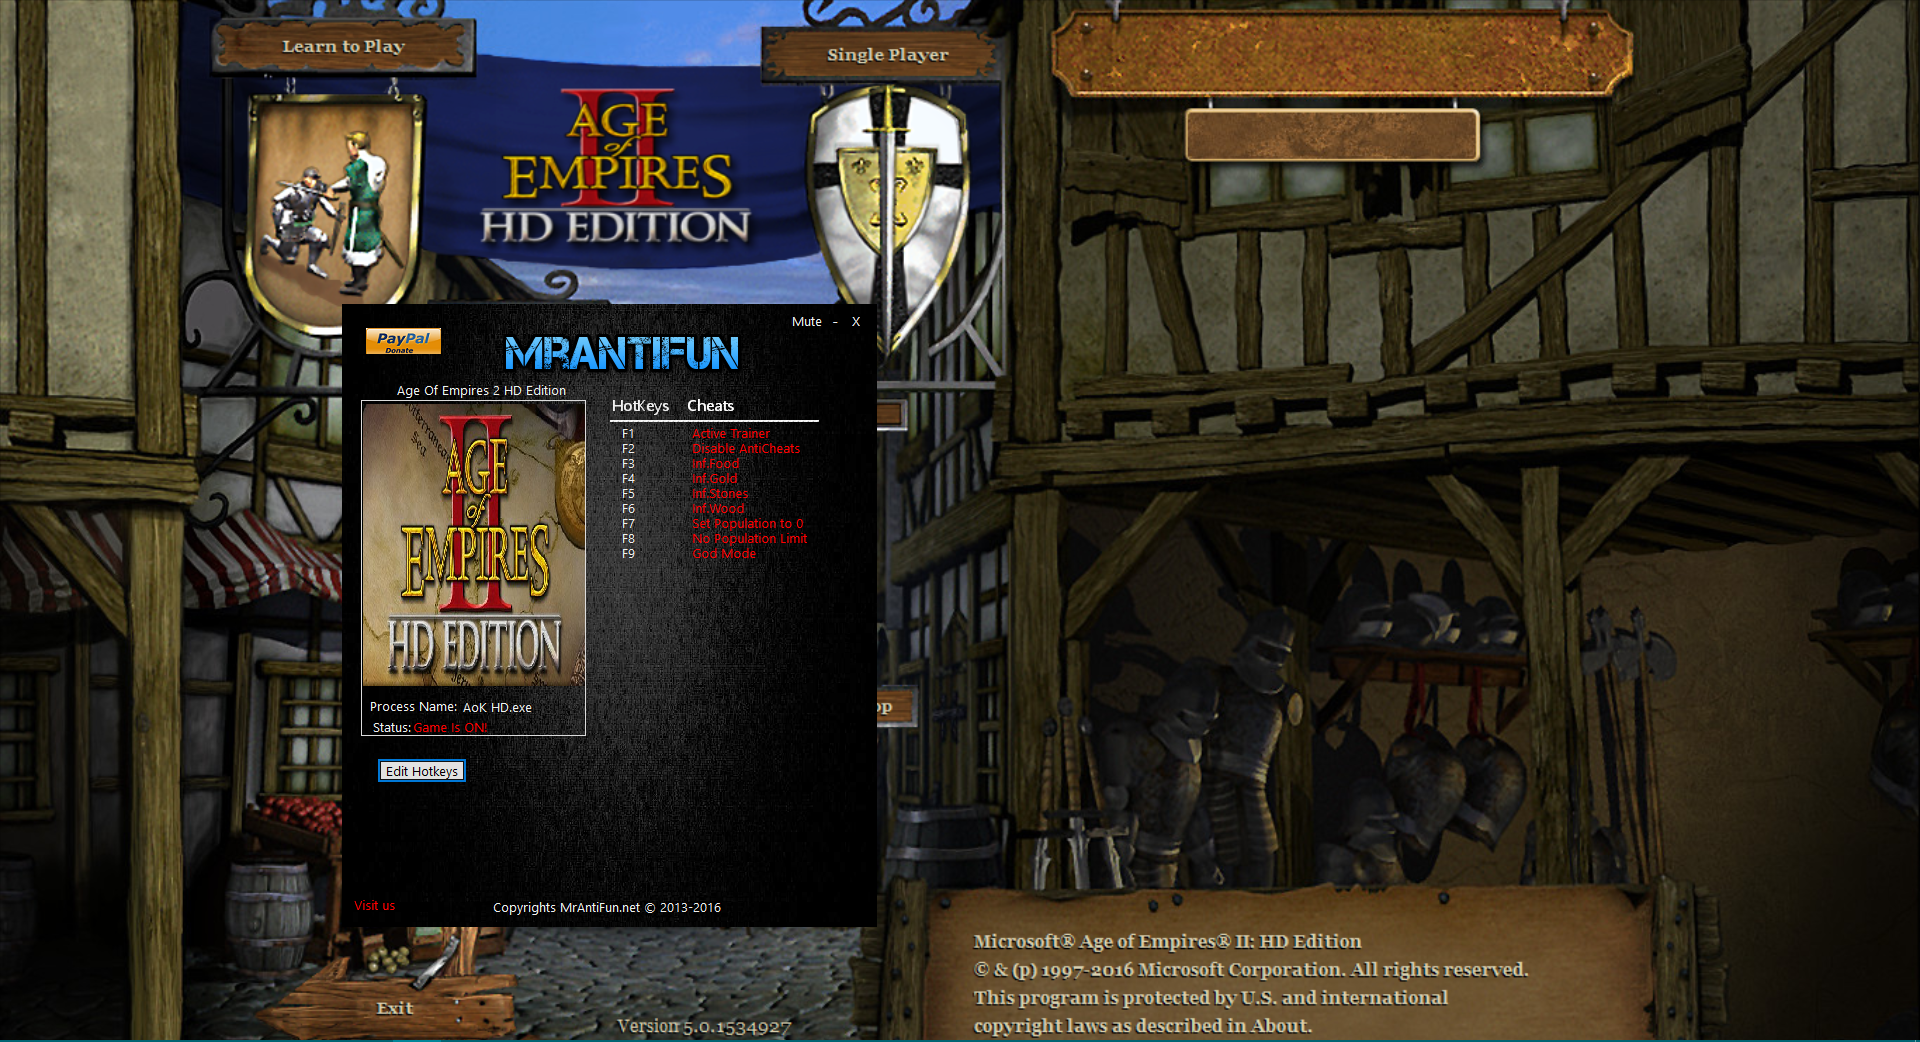 Age Of Empires Ii Hd The Forgotten Trainer Page 13 Mrantifun Pc Video Game Trainers Cheats And Mods